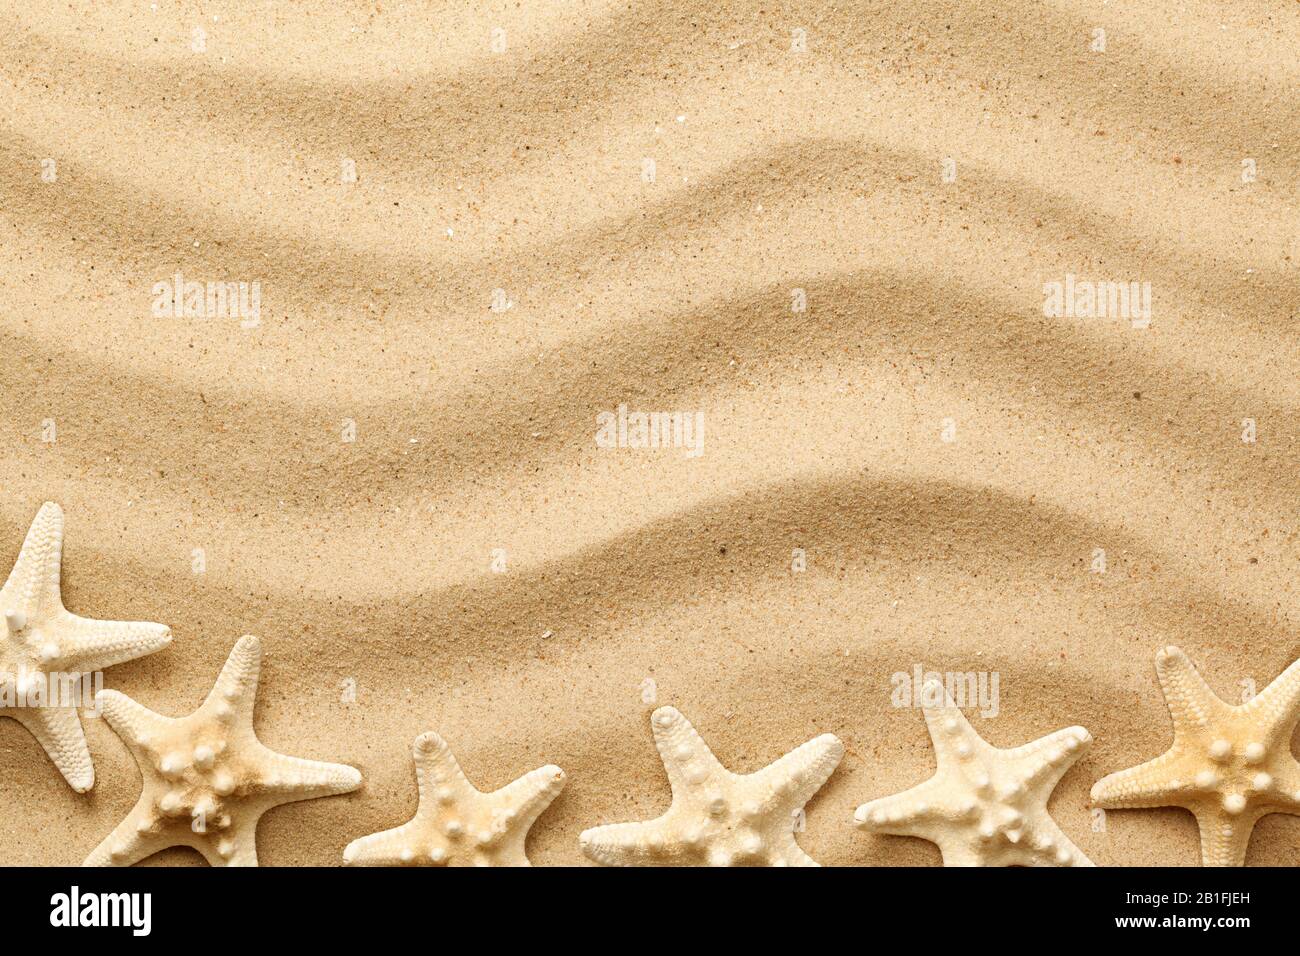 Starfishes on wavy sand background for summer designs. Top view, flat lay Stock Photo